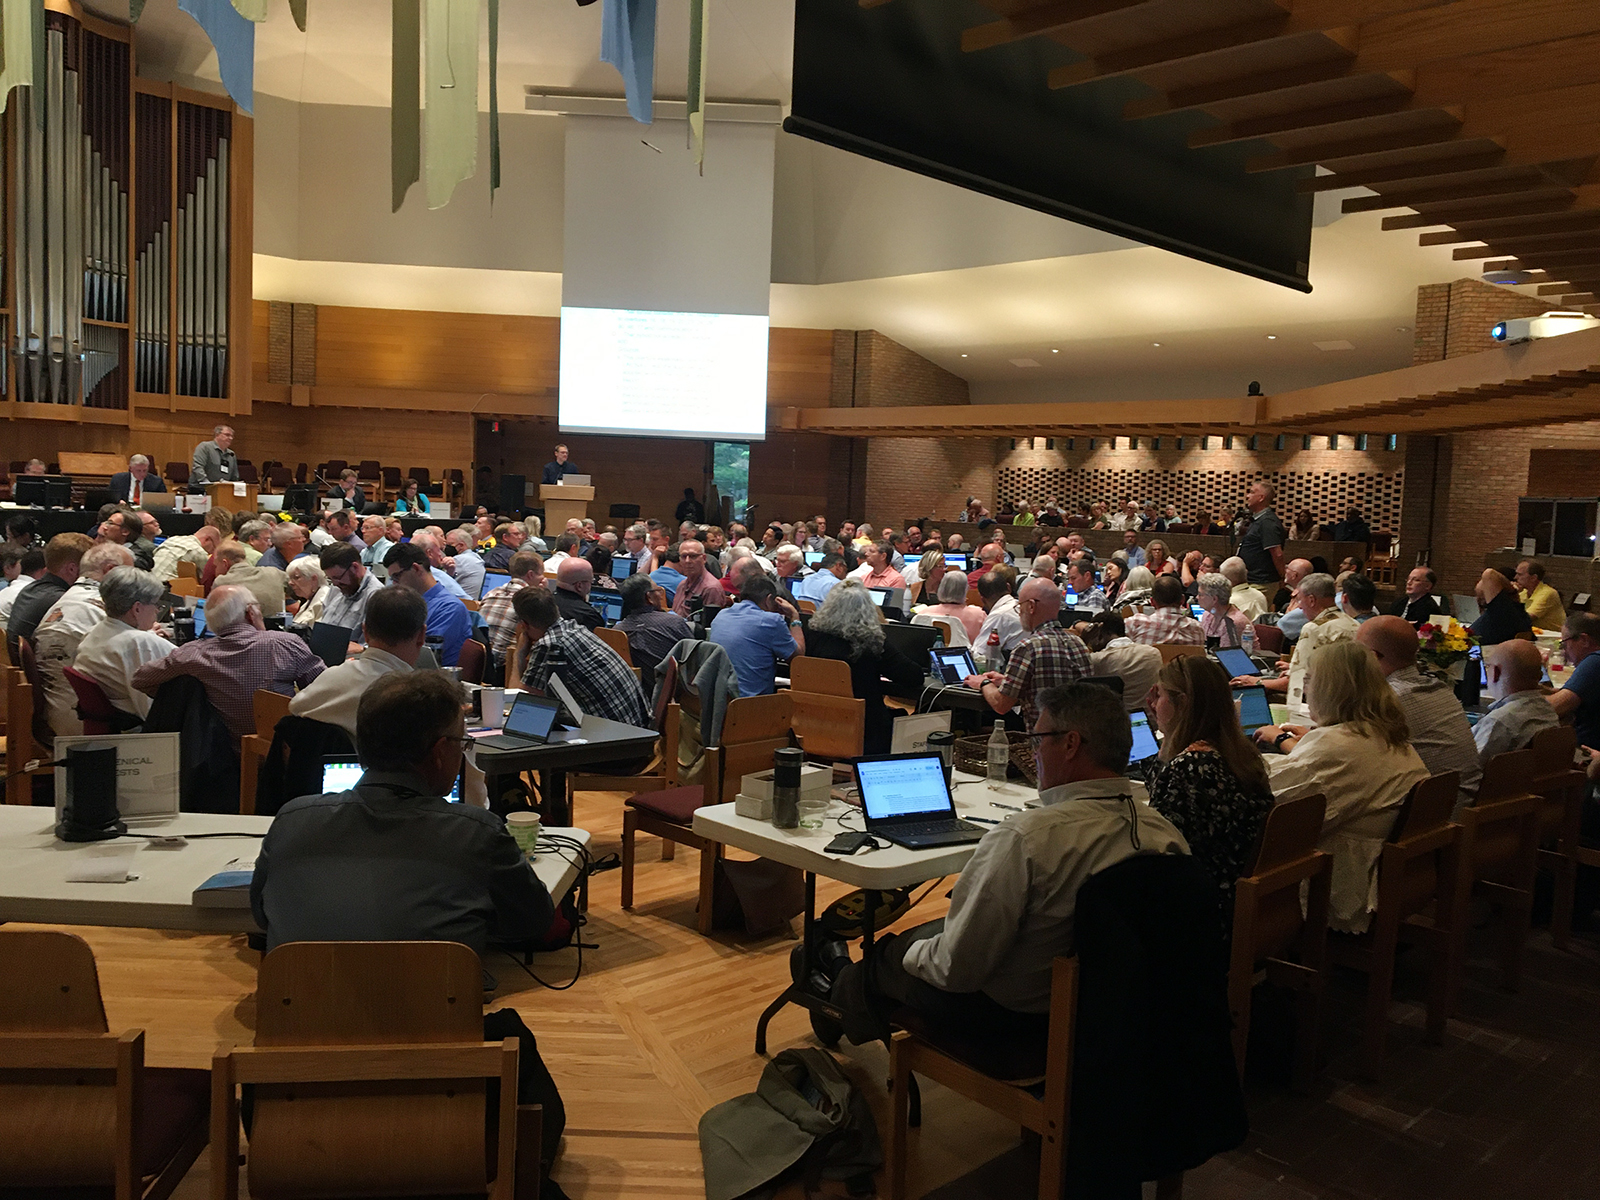 People attend the annual synod of the Christian Reformed Church at Calvin University in Grand Rapids, Michigan, Tuesday, June 13, 2023. Photo by Grace Buller